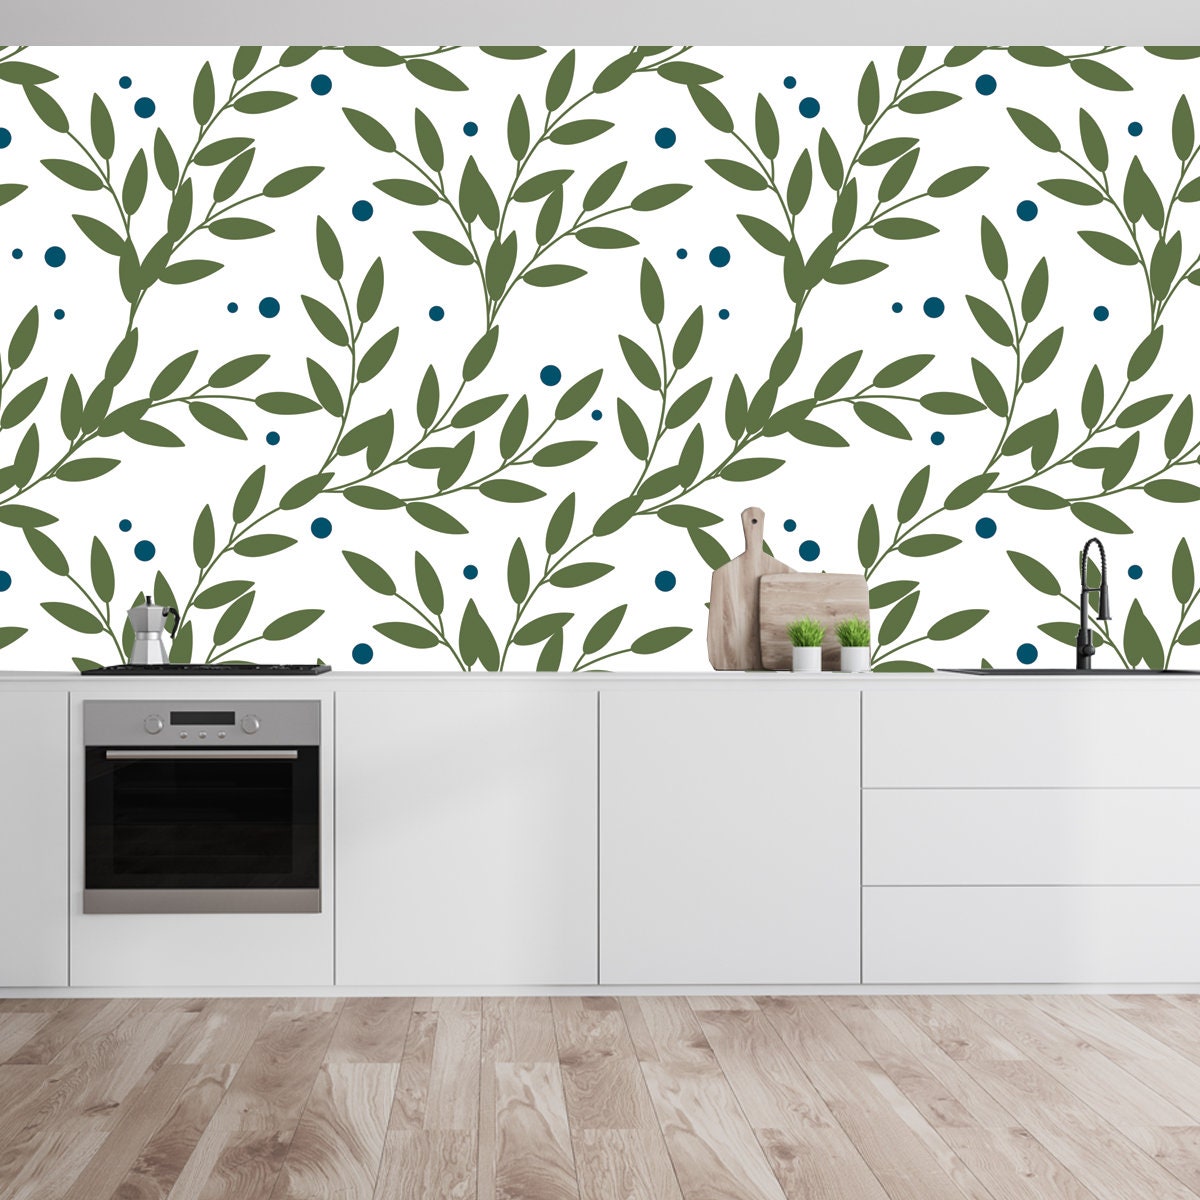 Floral Seamless Pattern in Natural Farmhouse Style with Cute Simple Branches, Berries, Leaves Wallpaper Kitchen Mural